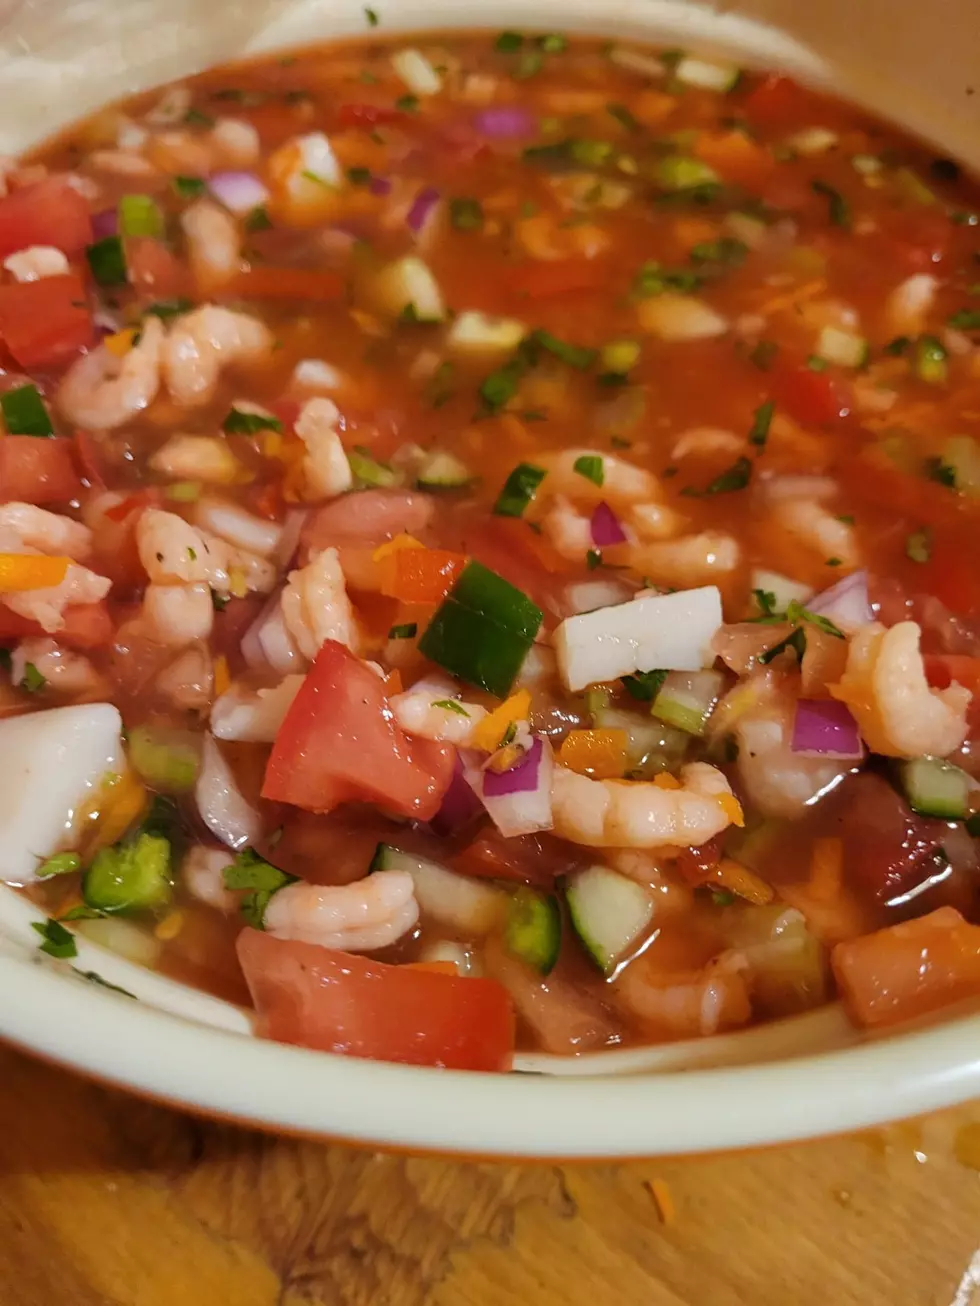 Craving Fresh Ceviche? This Recipe is Delicious and a Must Try!